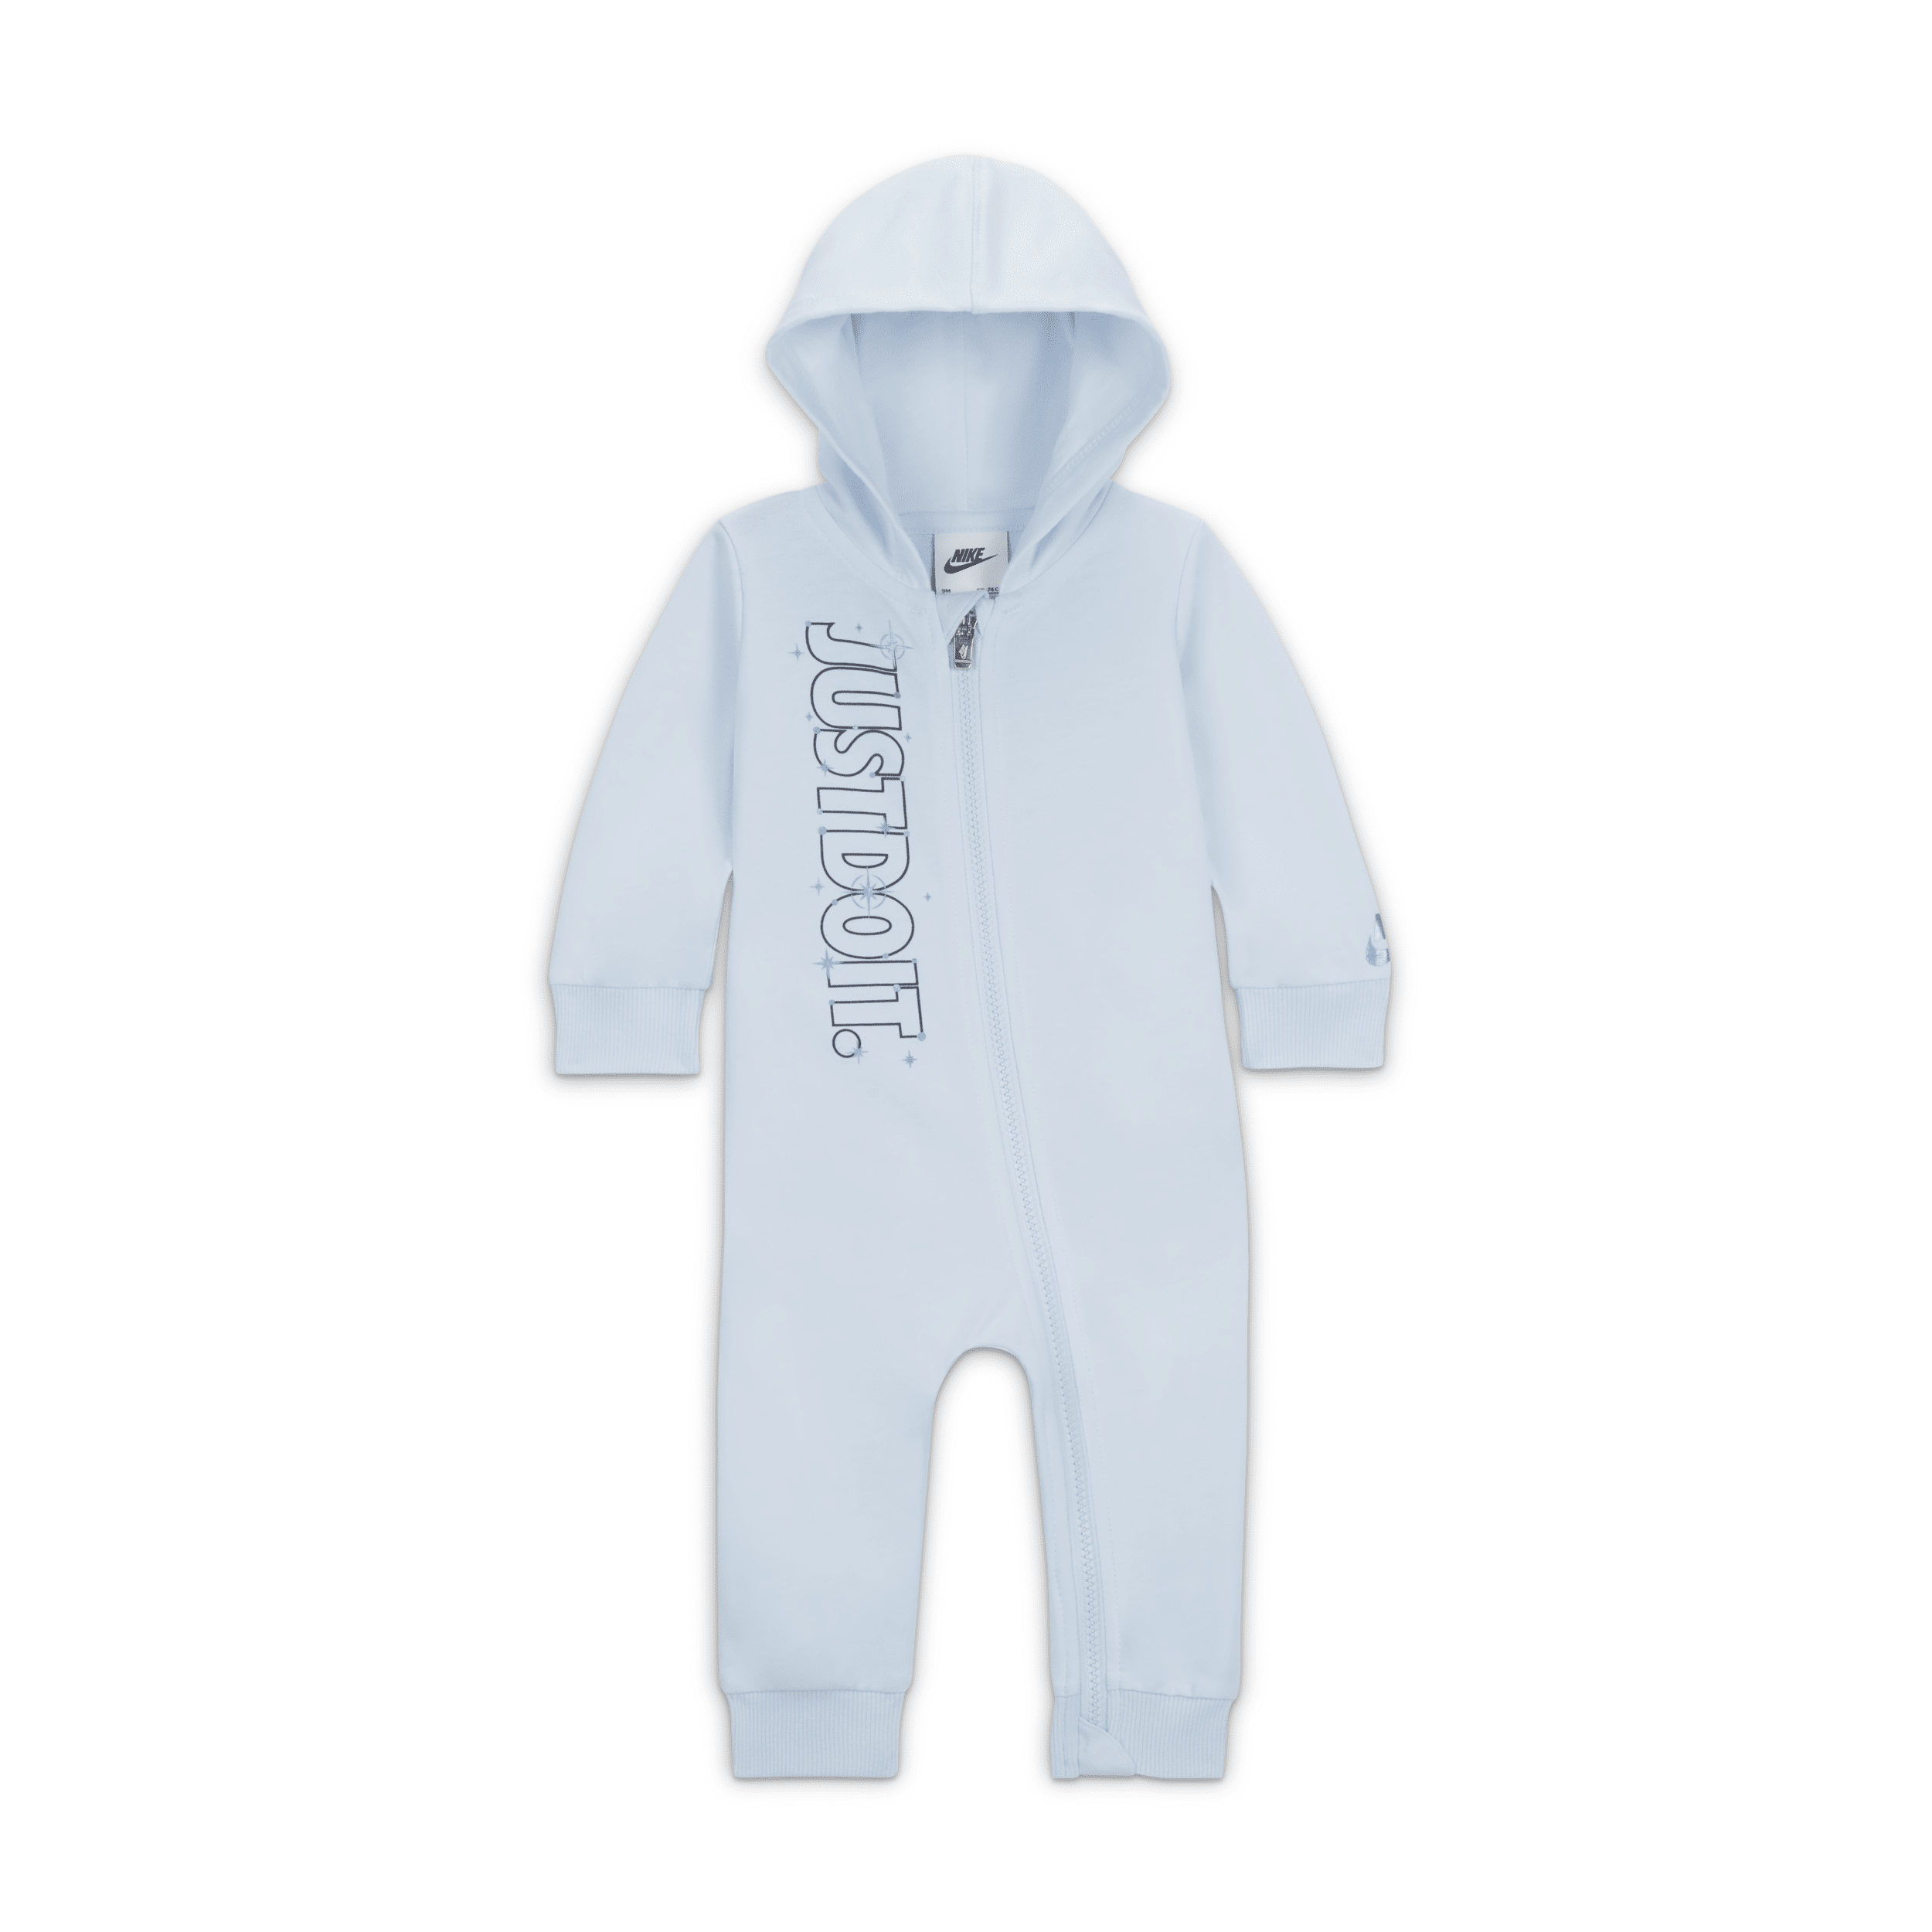 Nike Sportswear Shine Graphic Hooded Coverall Baby Coverall In Blue